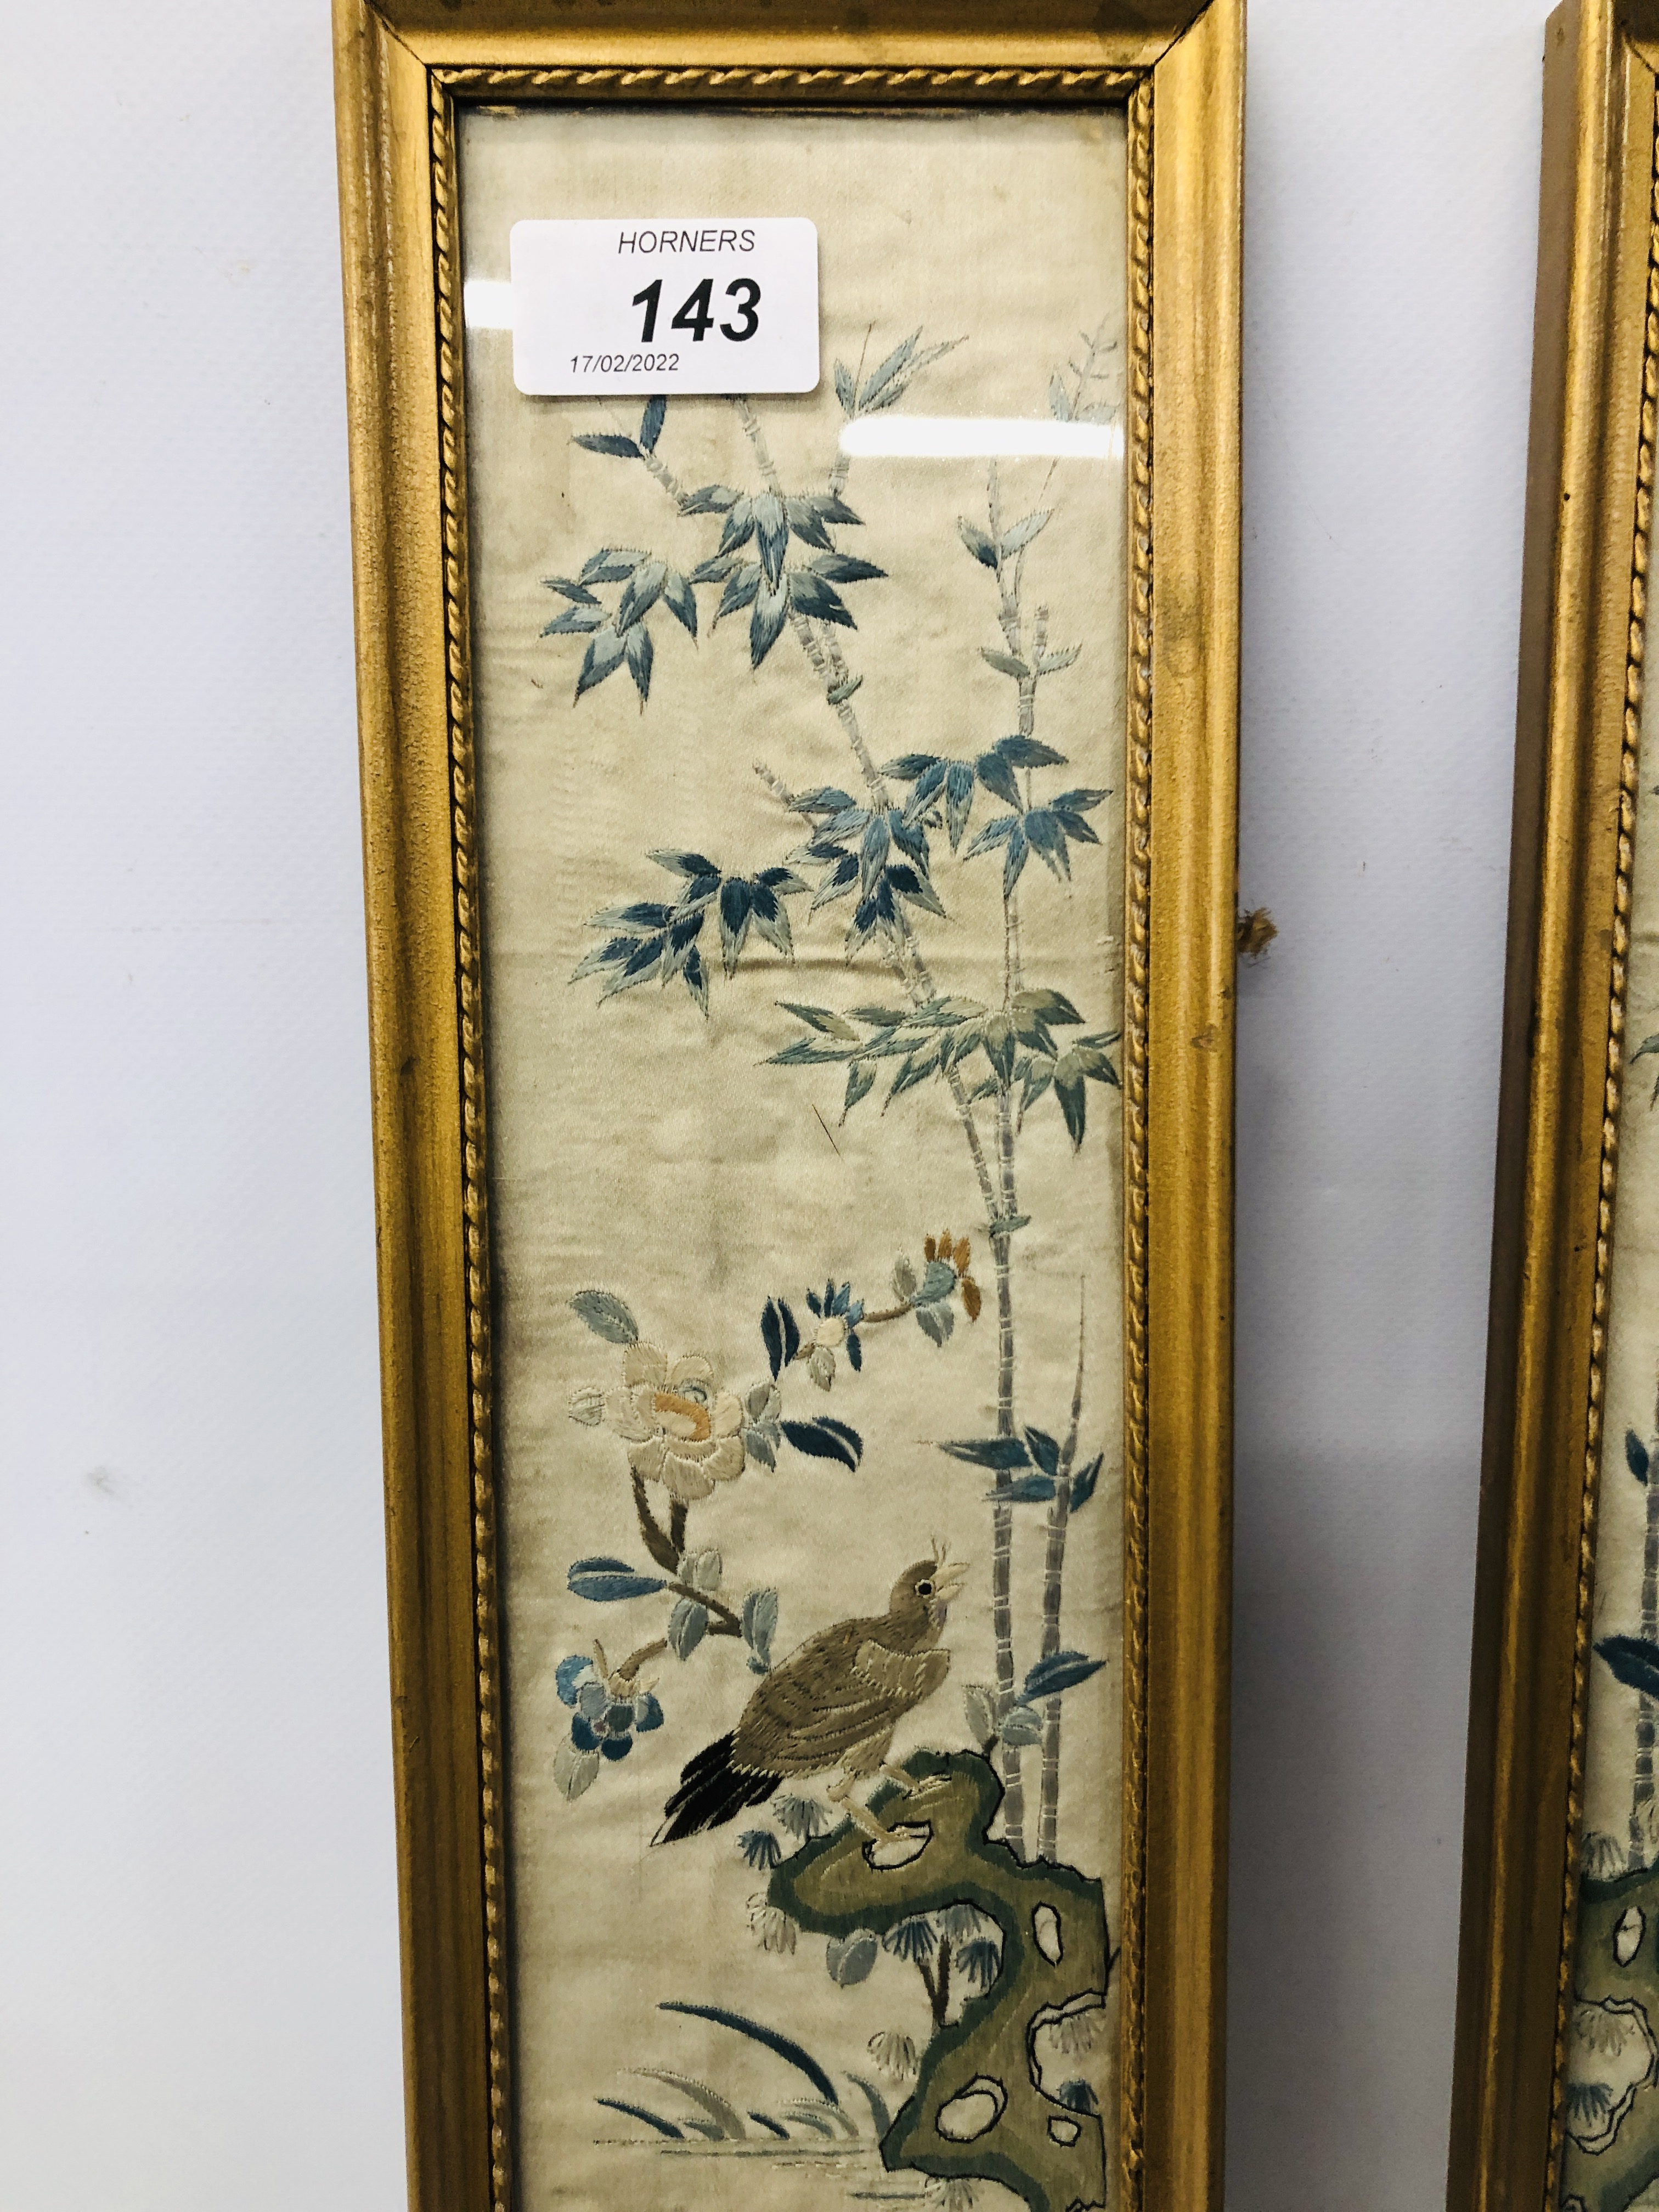 A PAIR OF C19TH CHINESE EMBROIDERIES OF BIRDS, ROCKS AND TREES EACH 54 X 9CM. - Image 2 of 5